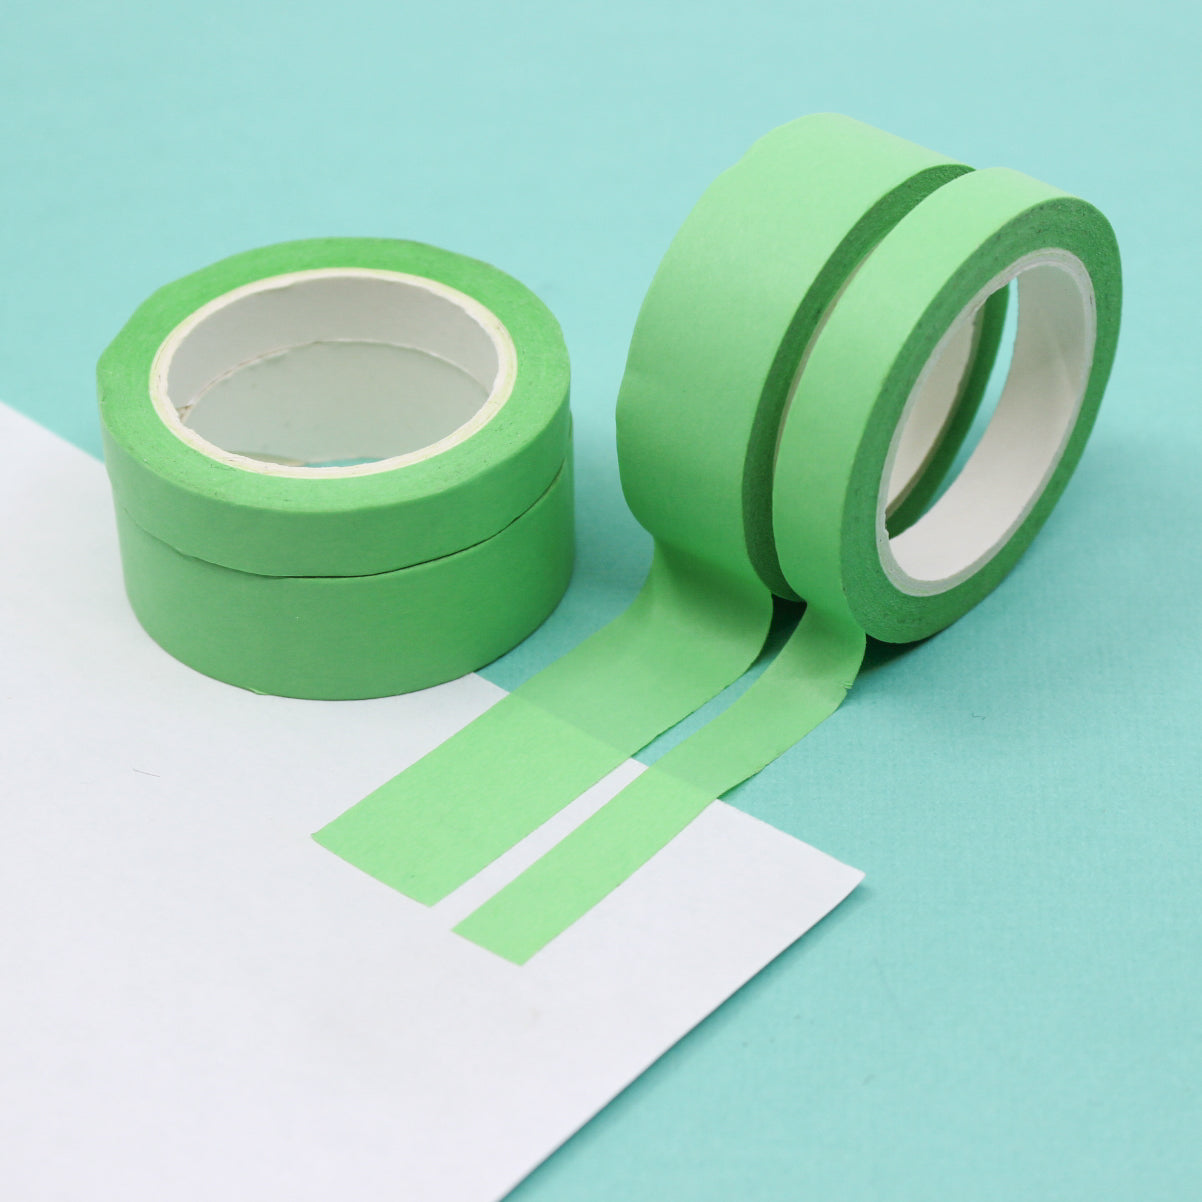 This pastel green washi tape is vibrant and fun. This washi tape is part of our solid neon thick-thin matching duo washi collection. Find the perfect color for any project in BBB Supplies' thick-thin solids collection, from neon to neutral to pastel and more. This tape is sold at BBB Supplies Craft Shop.